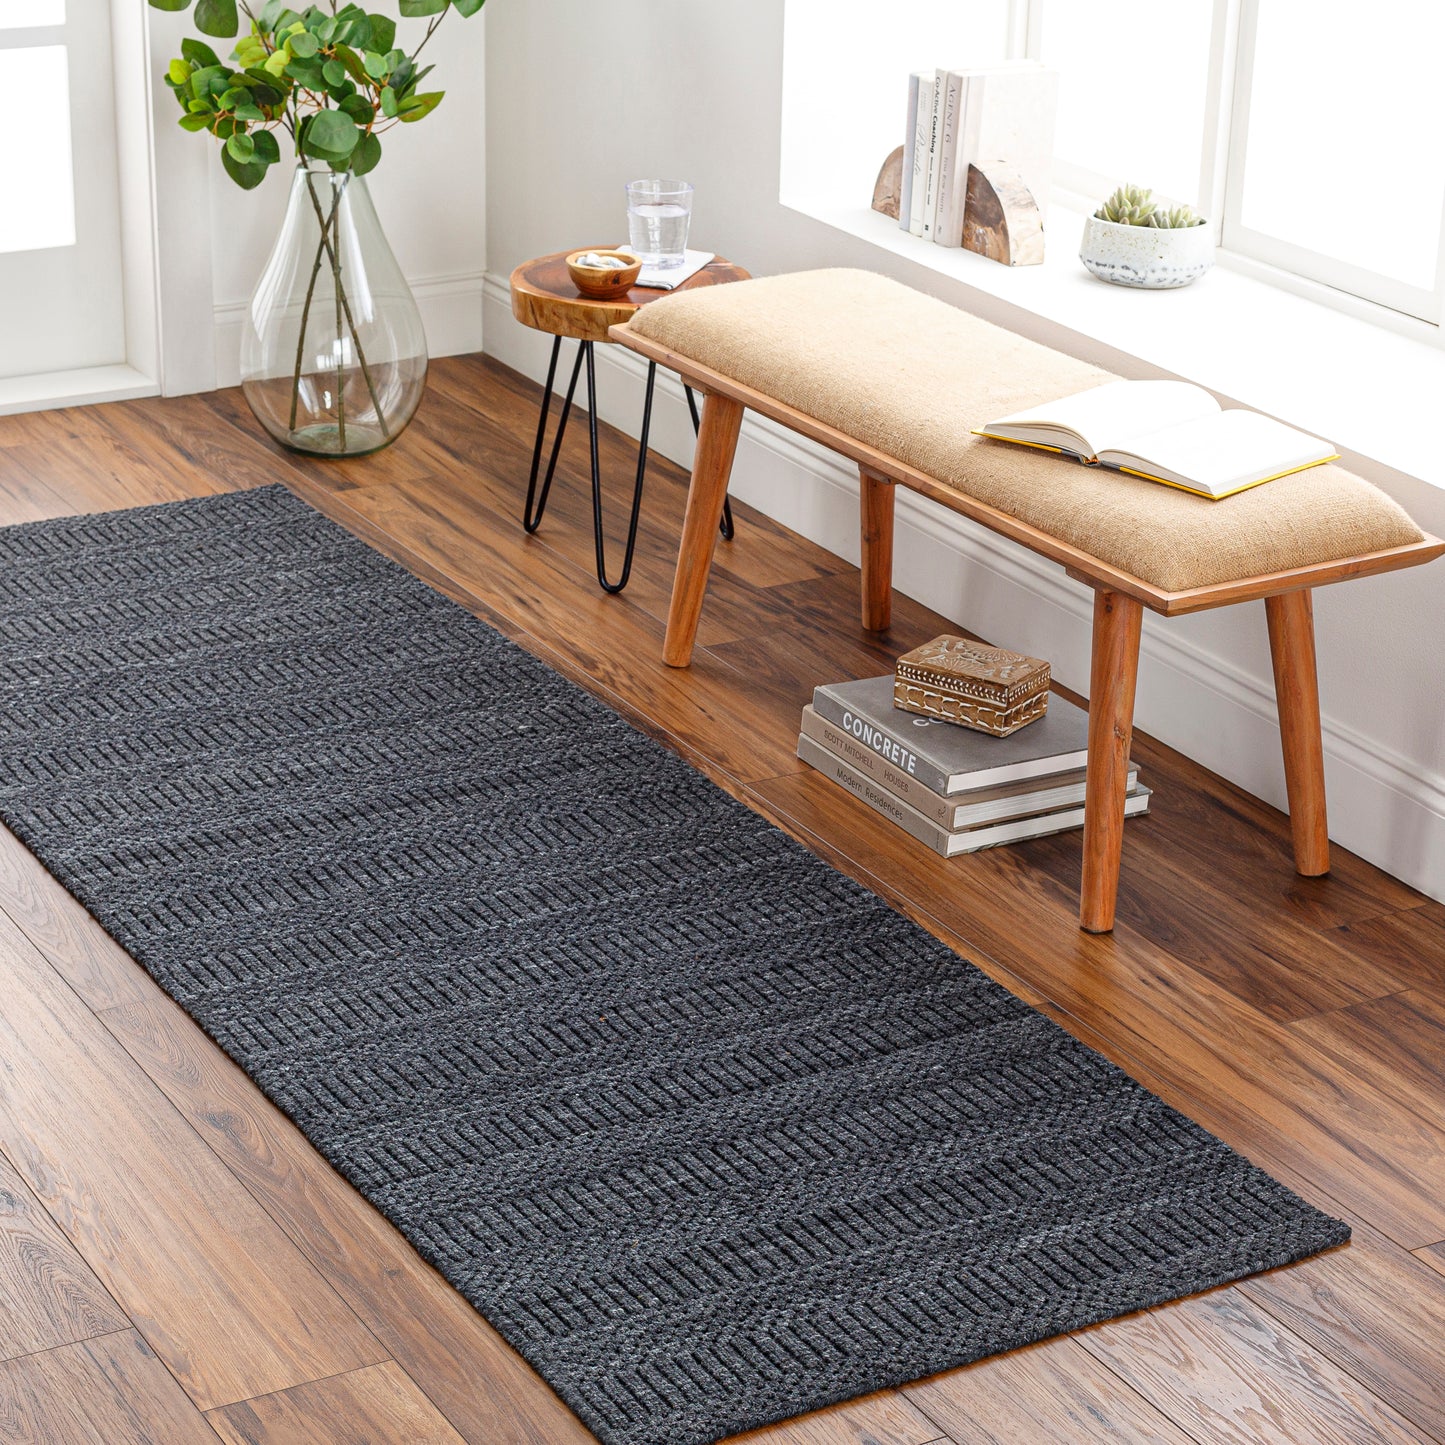 Hickory 30771 Hand Loomed Synthetic Blend Indoor/Outdoor Area Rug by Surya Rugs